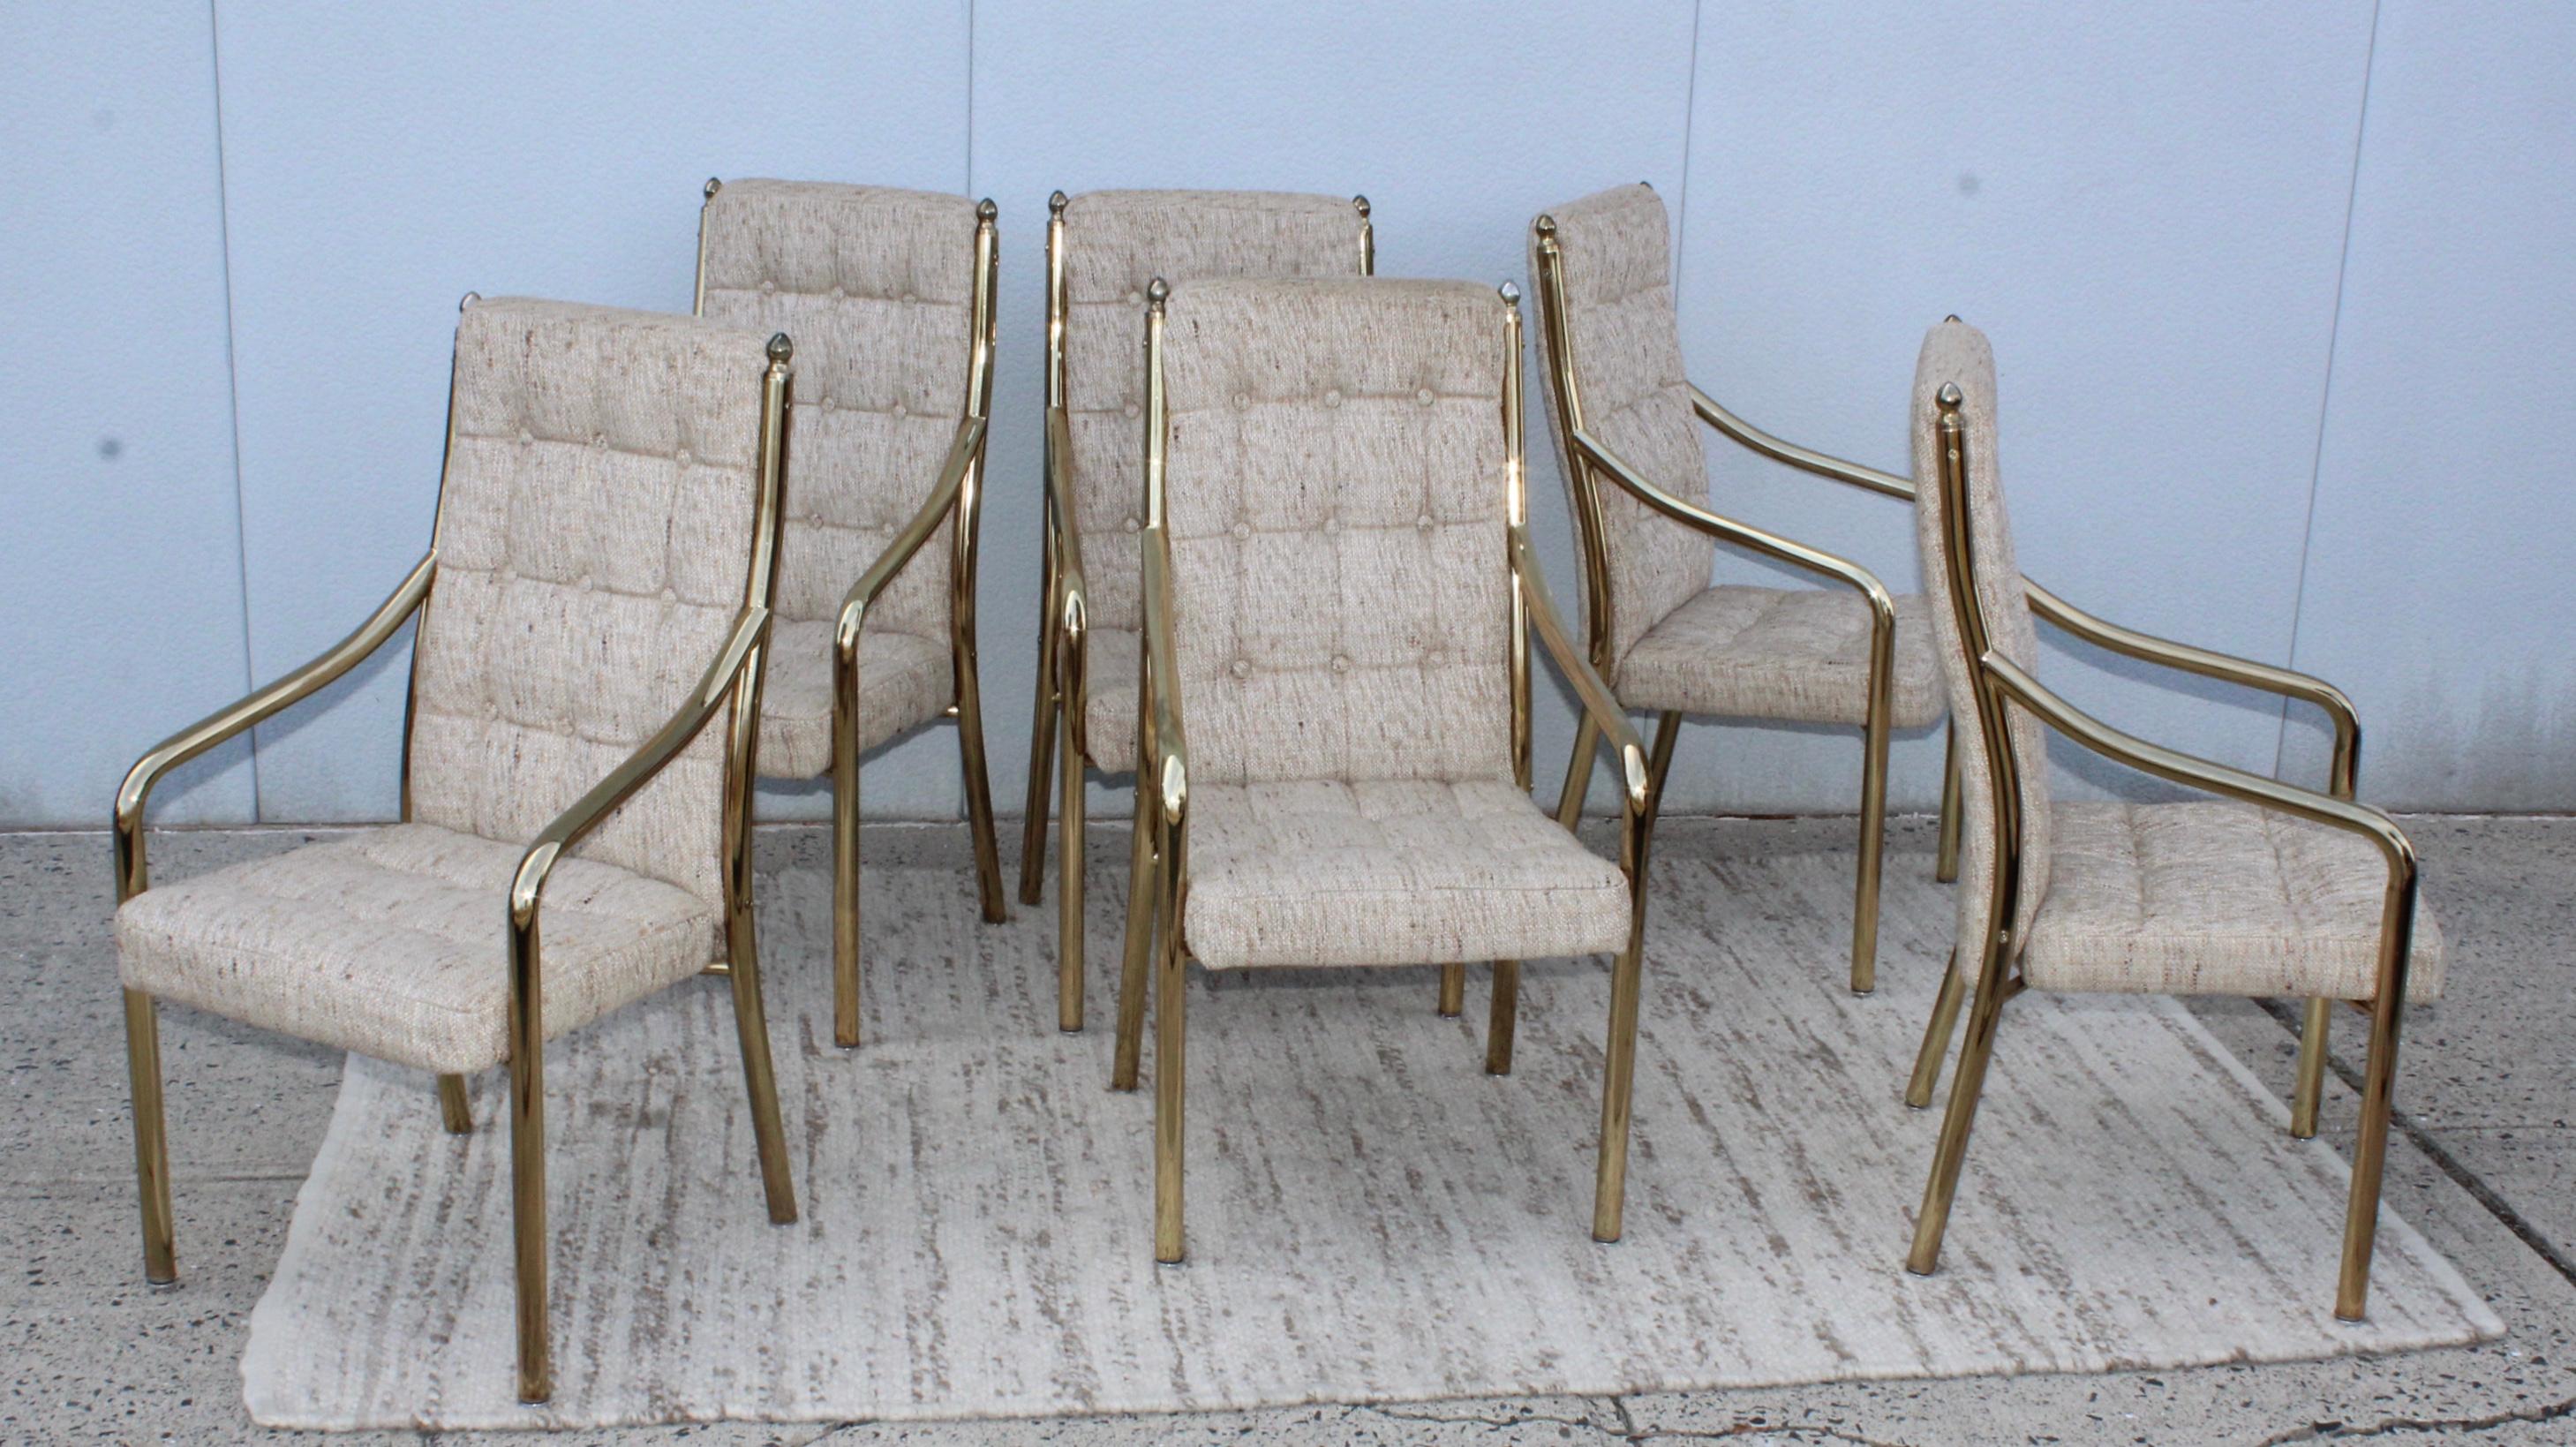 1980s modern very heavy metal with dining chairs with brass finish. In vintage original condition with original upholstery. With minor wear an patina to the brass.